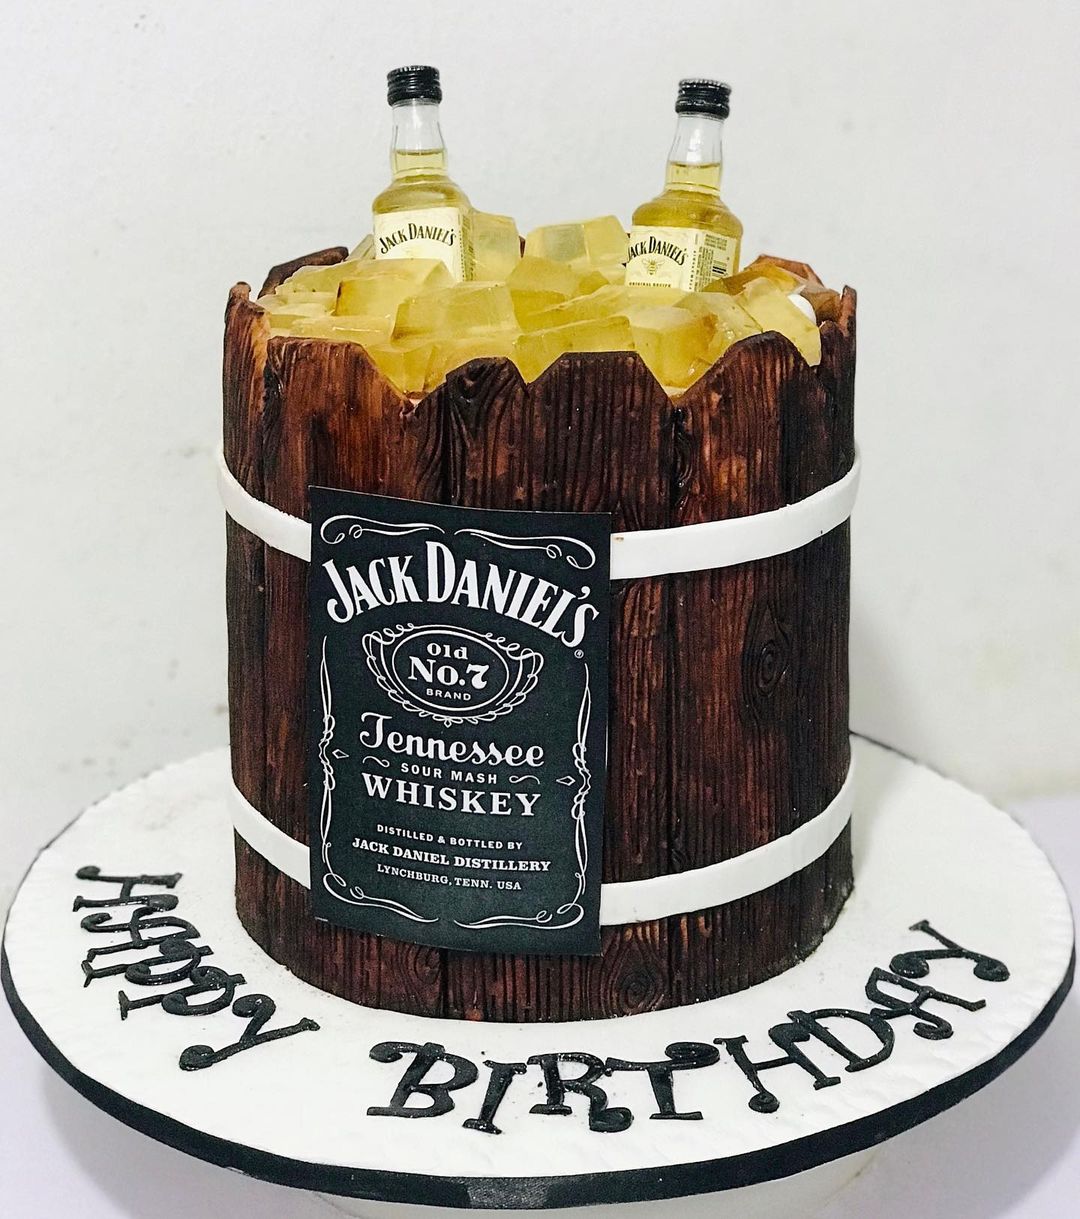 The 43 Most Creative Cake Designs by a Nigerian in 2022